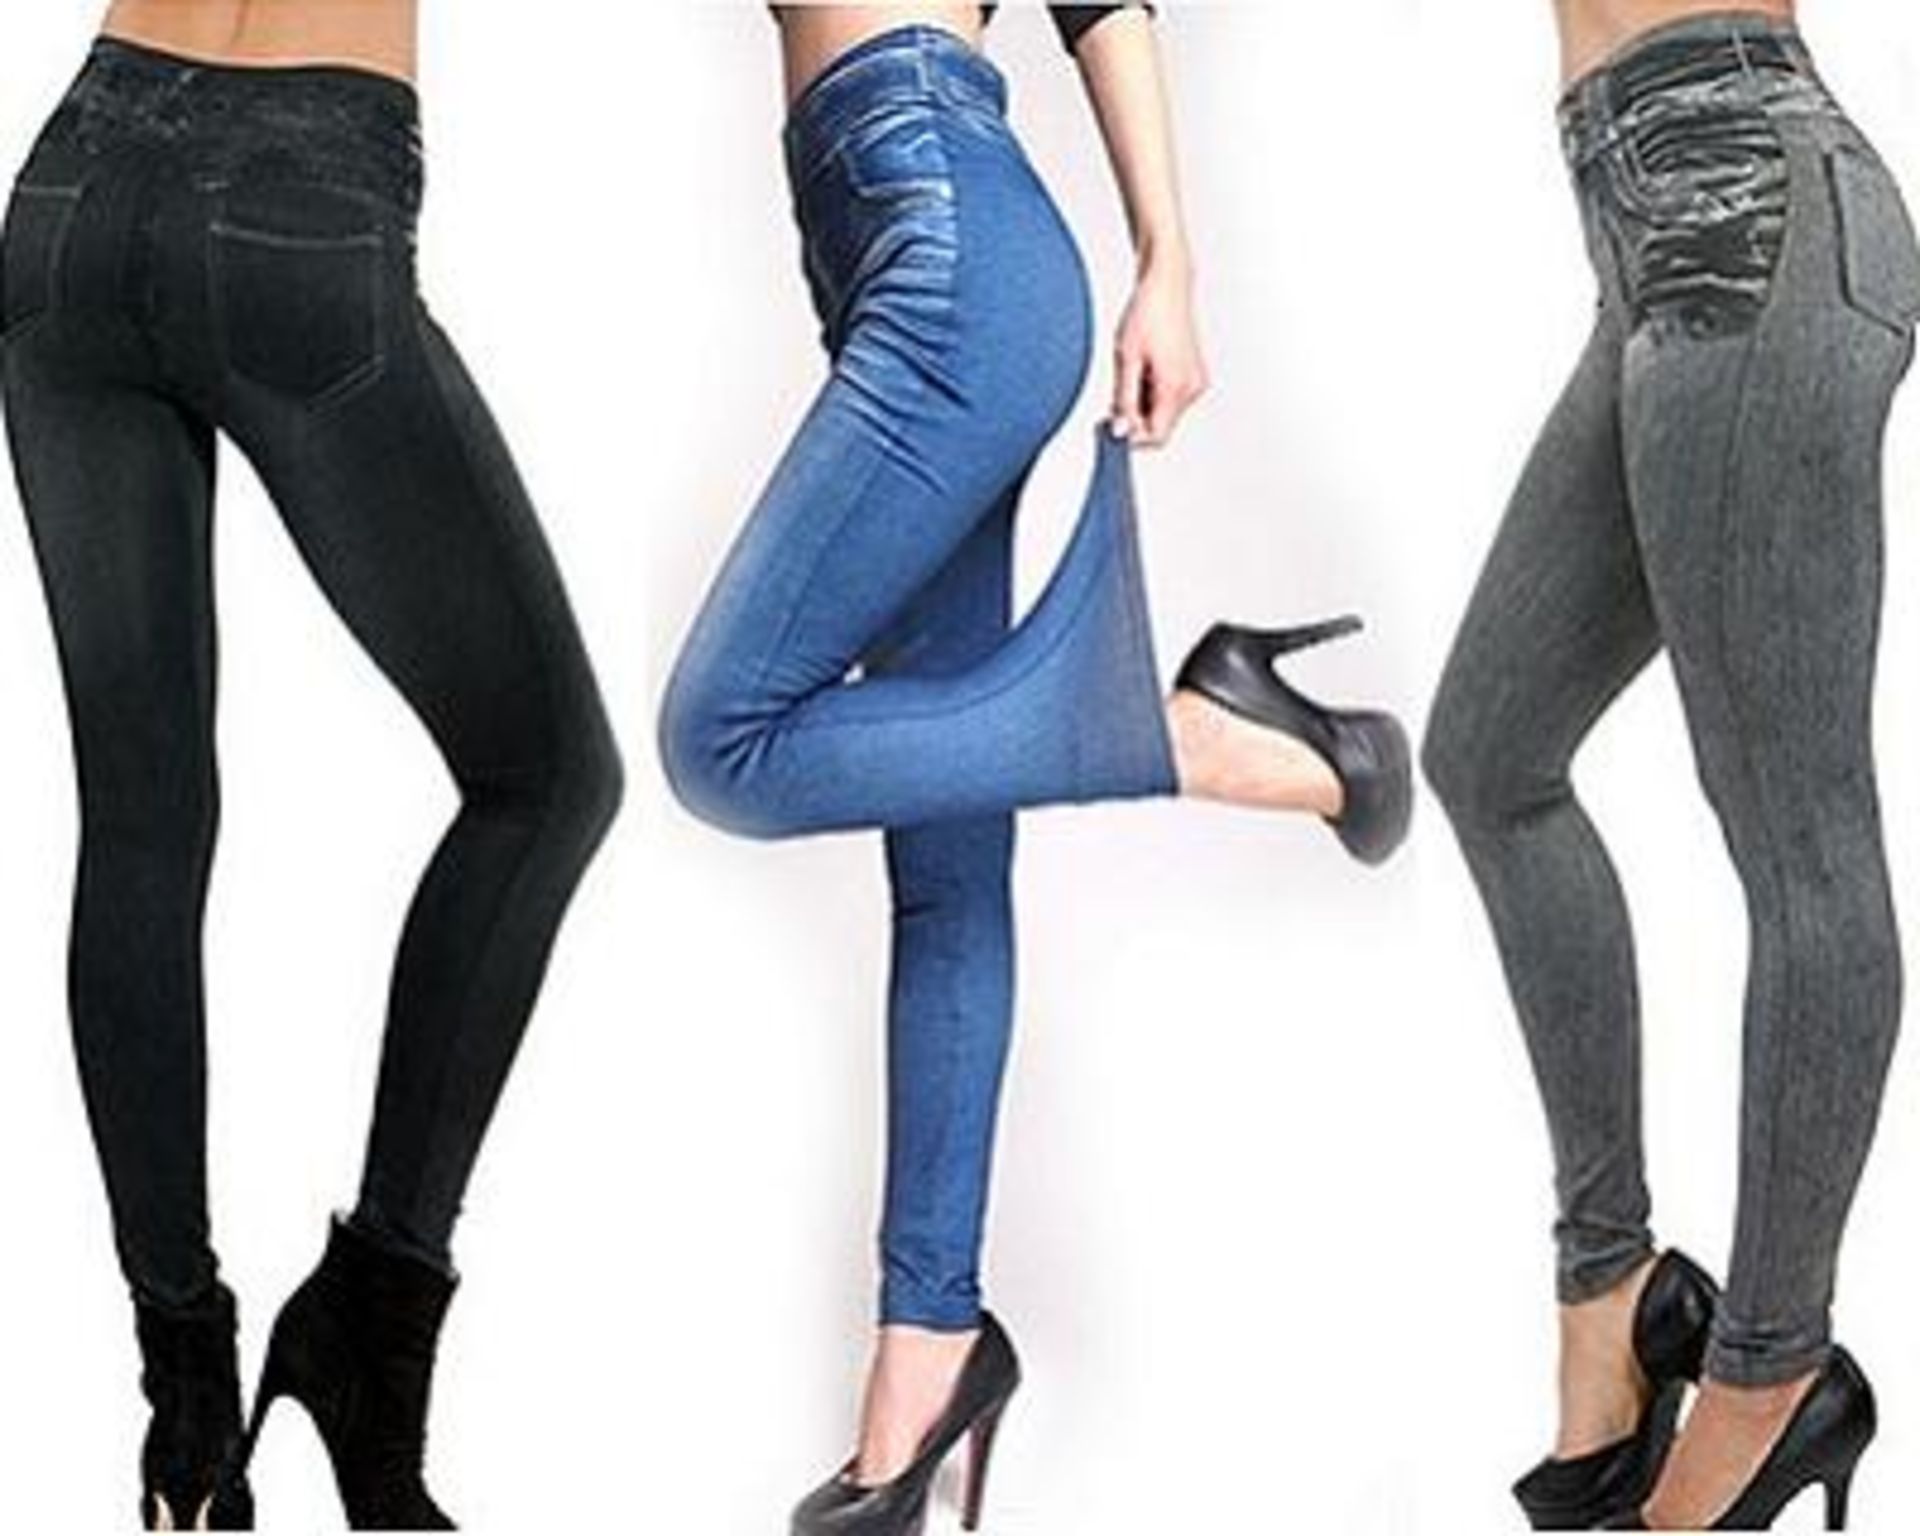 V *TRADE QTY* Brand New Three Pairs Of Capri Leggings Size 10-12 The look of designer Jeans/